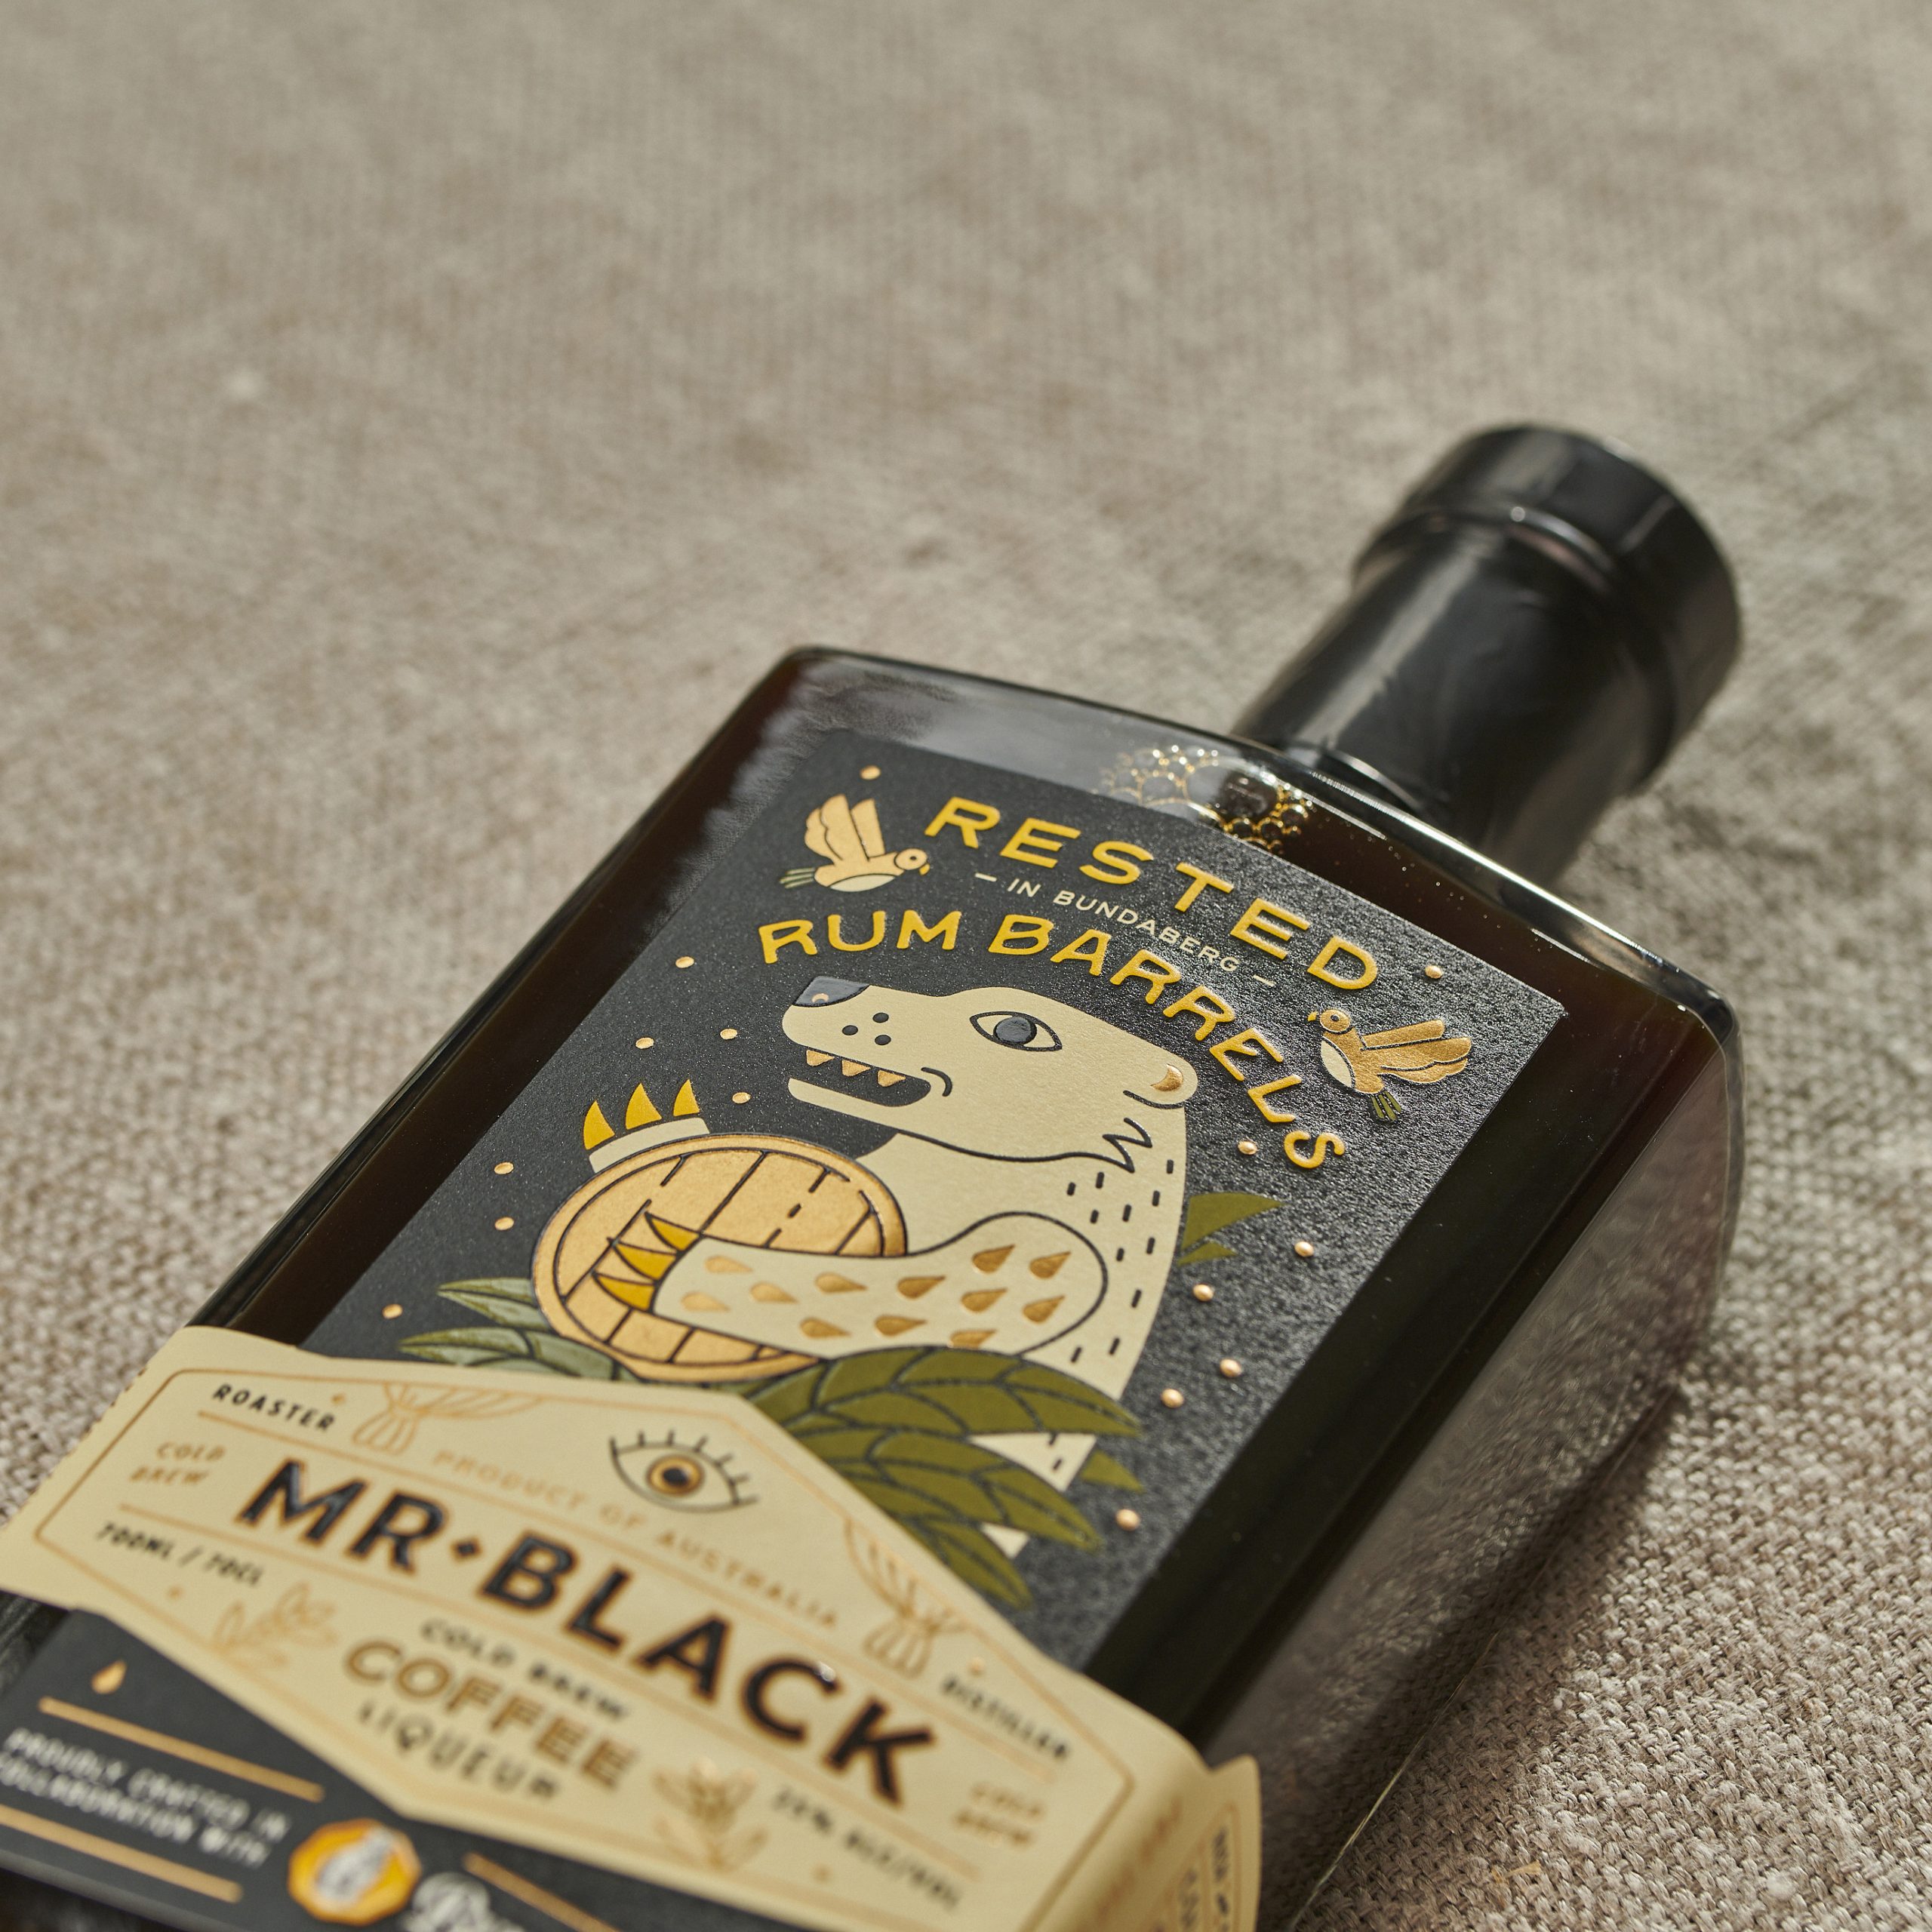 A BLEND OF THE WORLD’S BEST RUM AND MR BLACK COFFEE LIQUEUR splash image